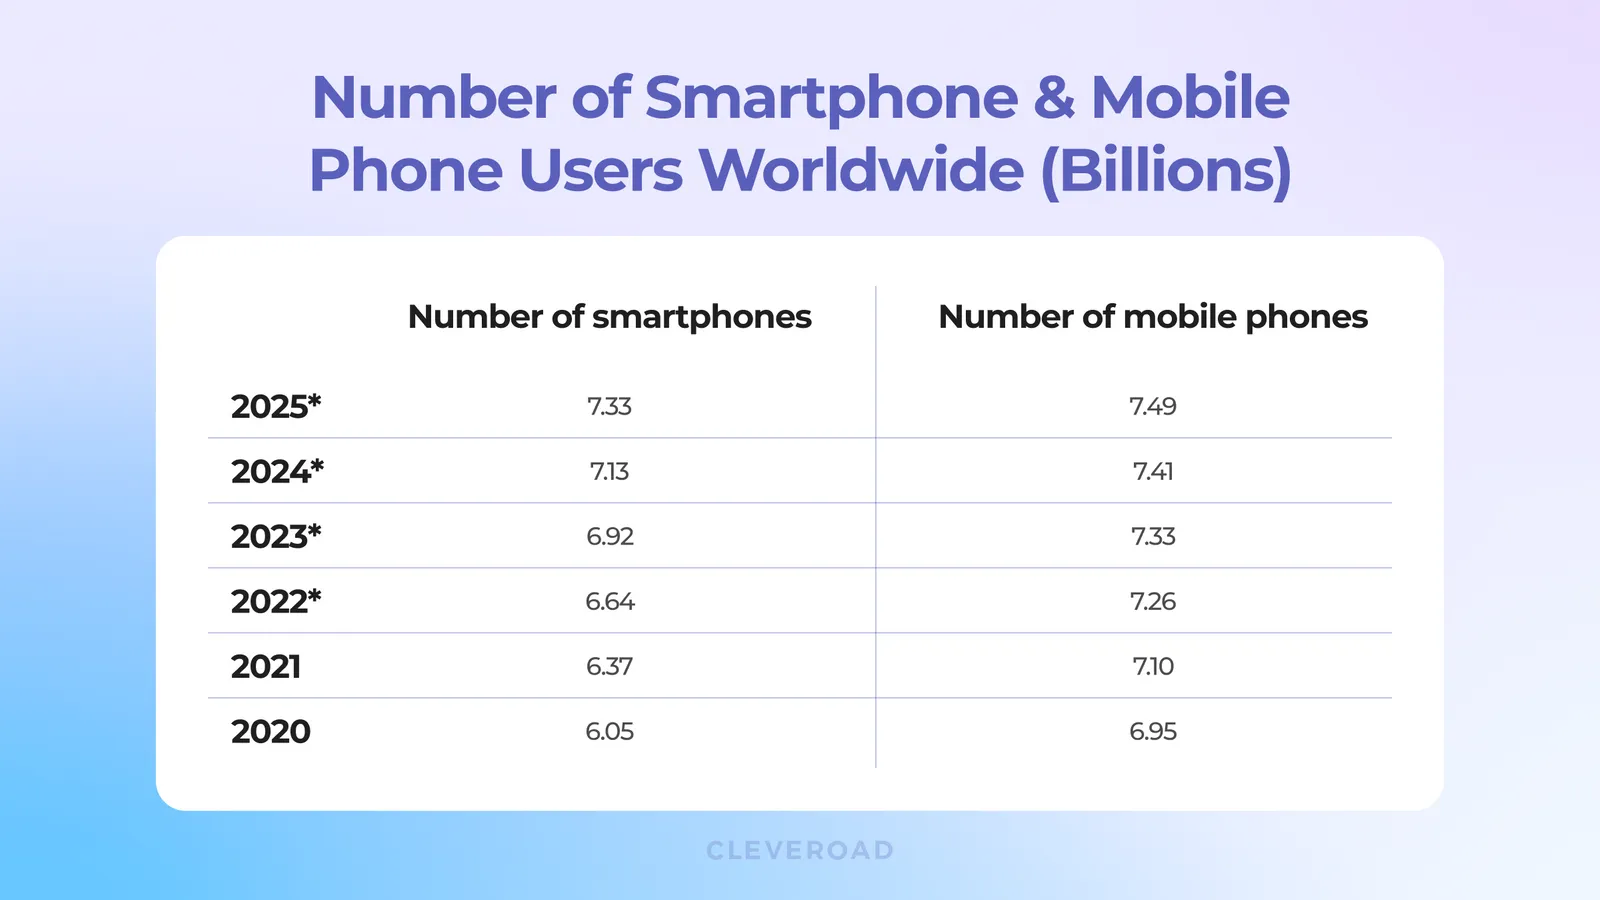 Number of mobile devices worldwide